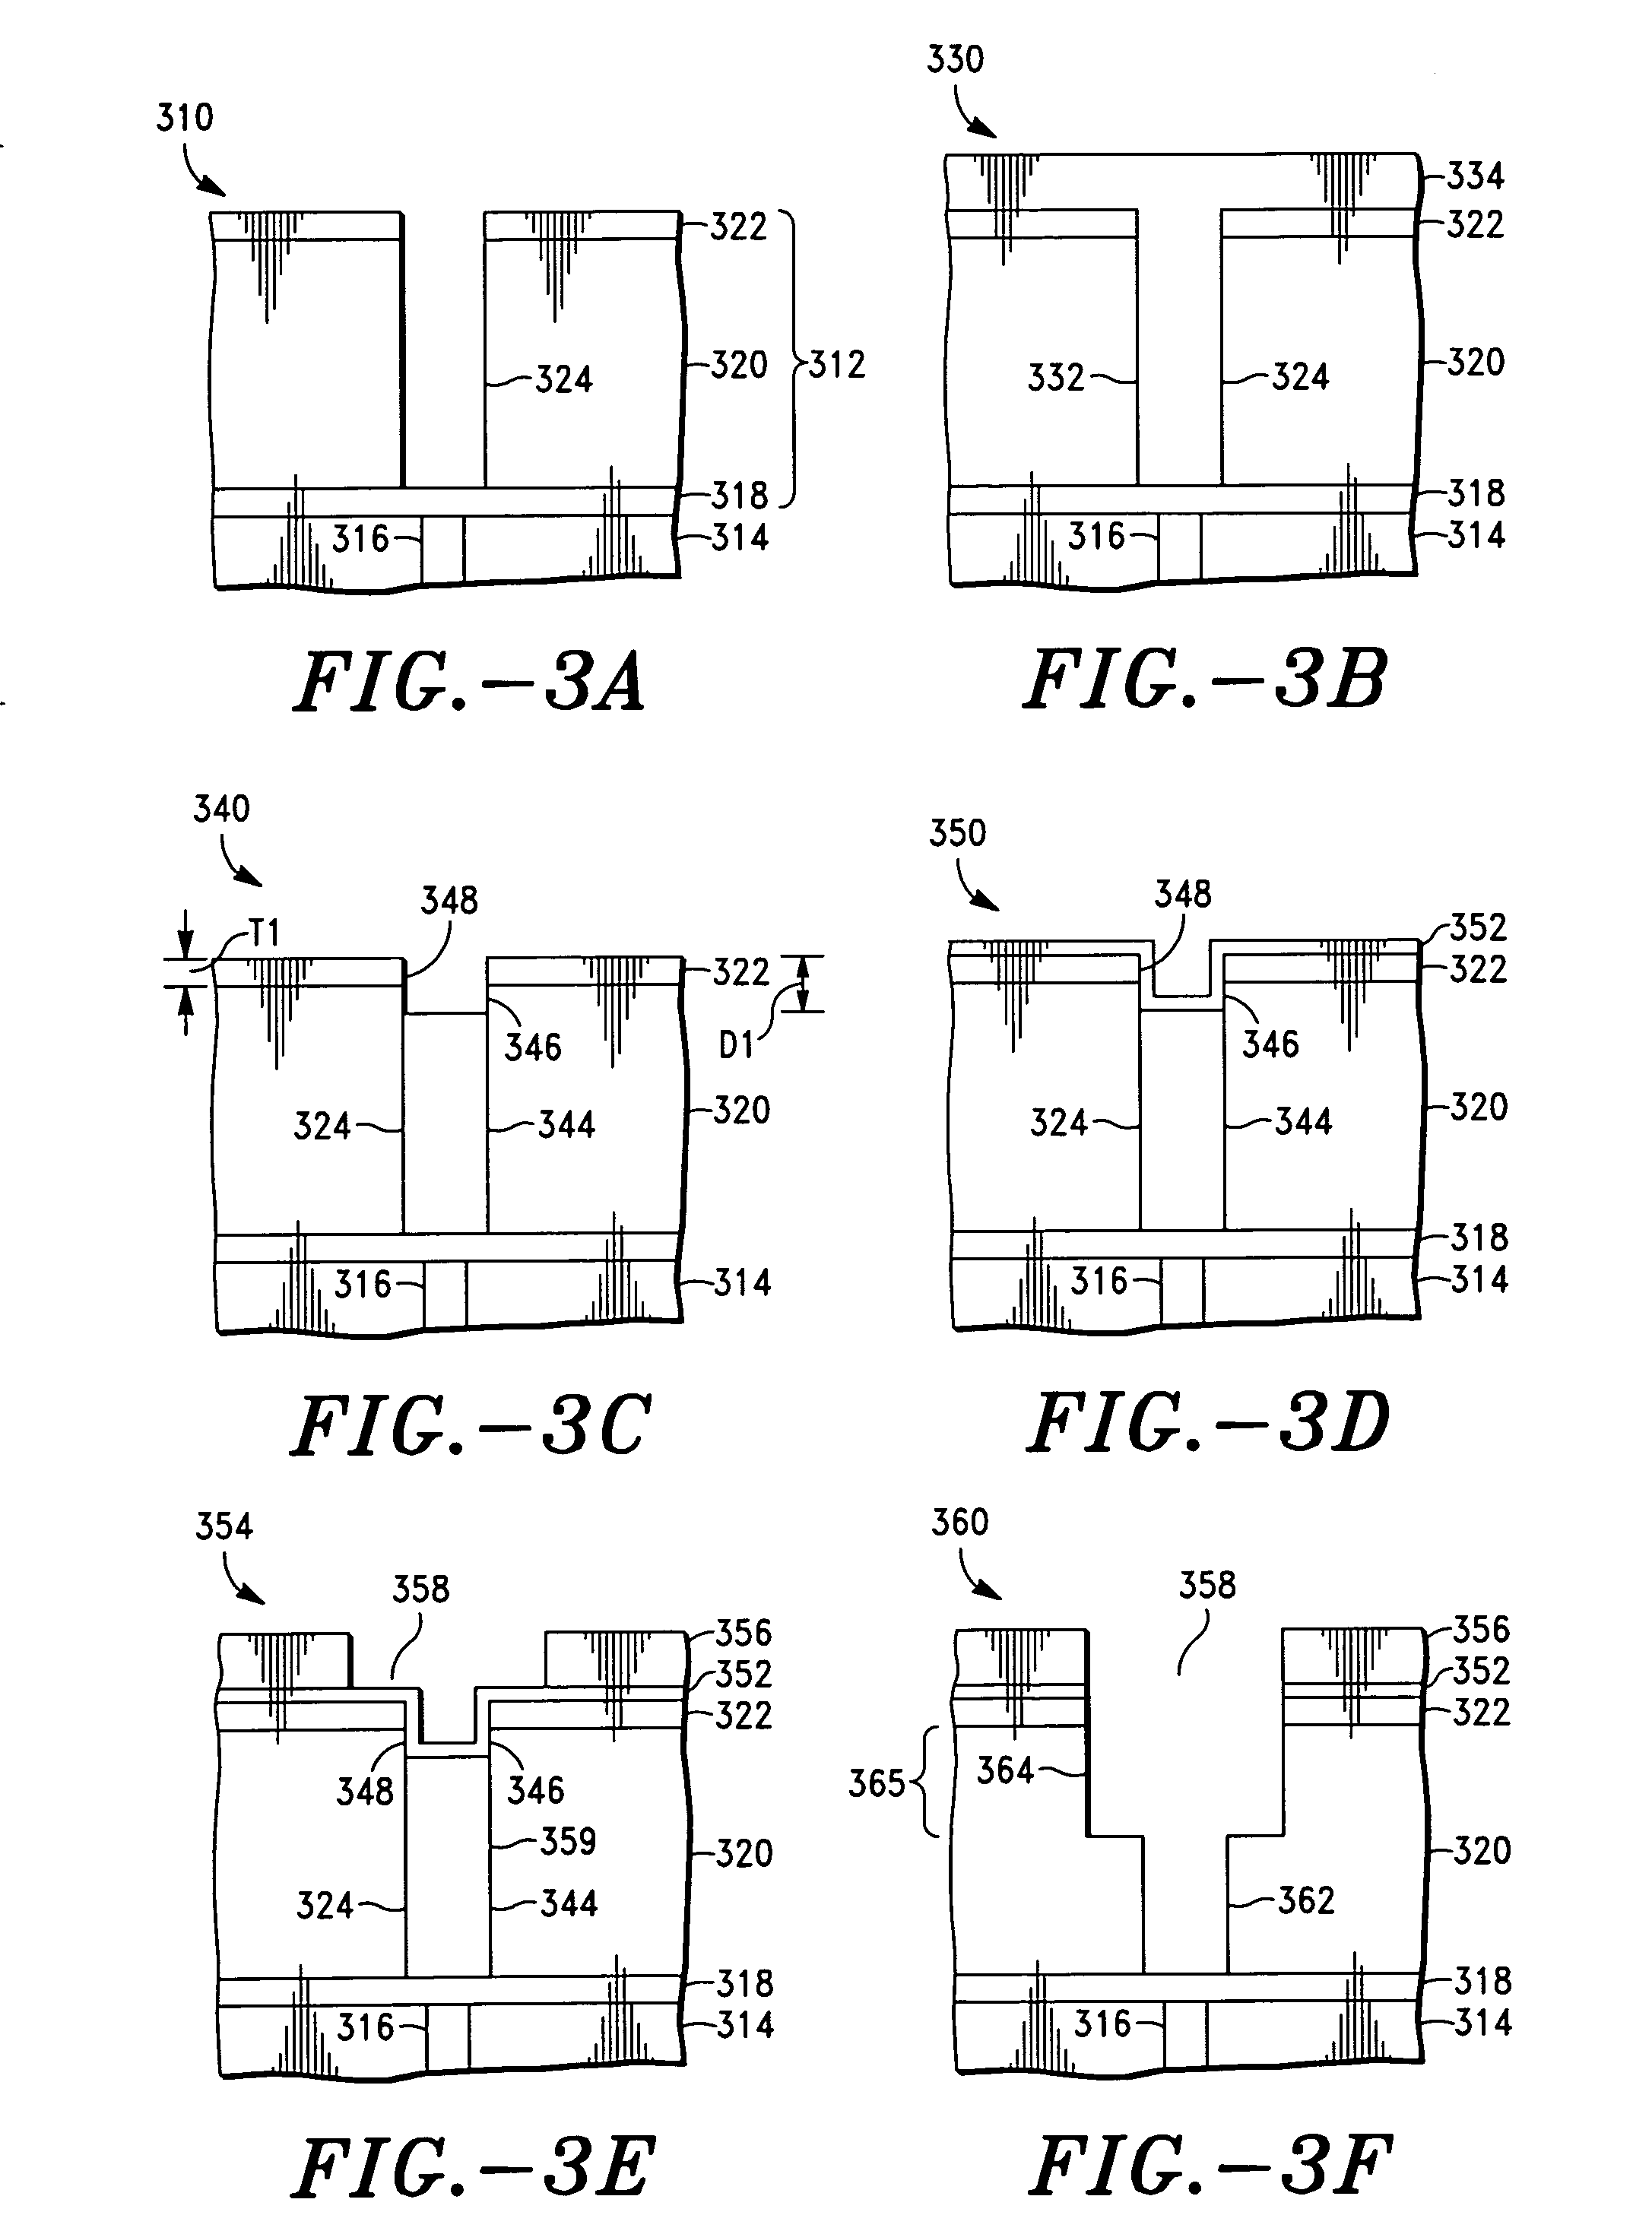 Integrated circuit fabricating techniques employing sacrificial liners